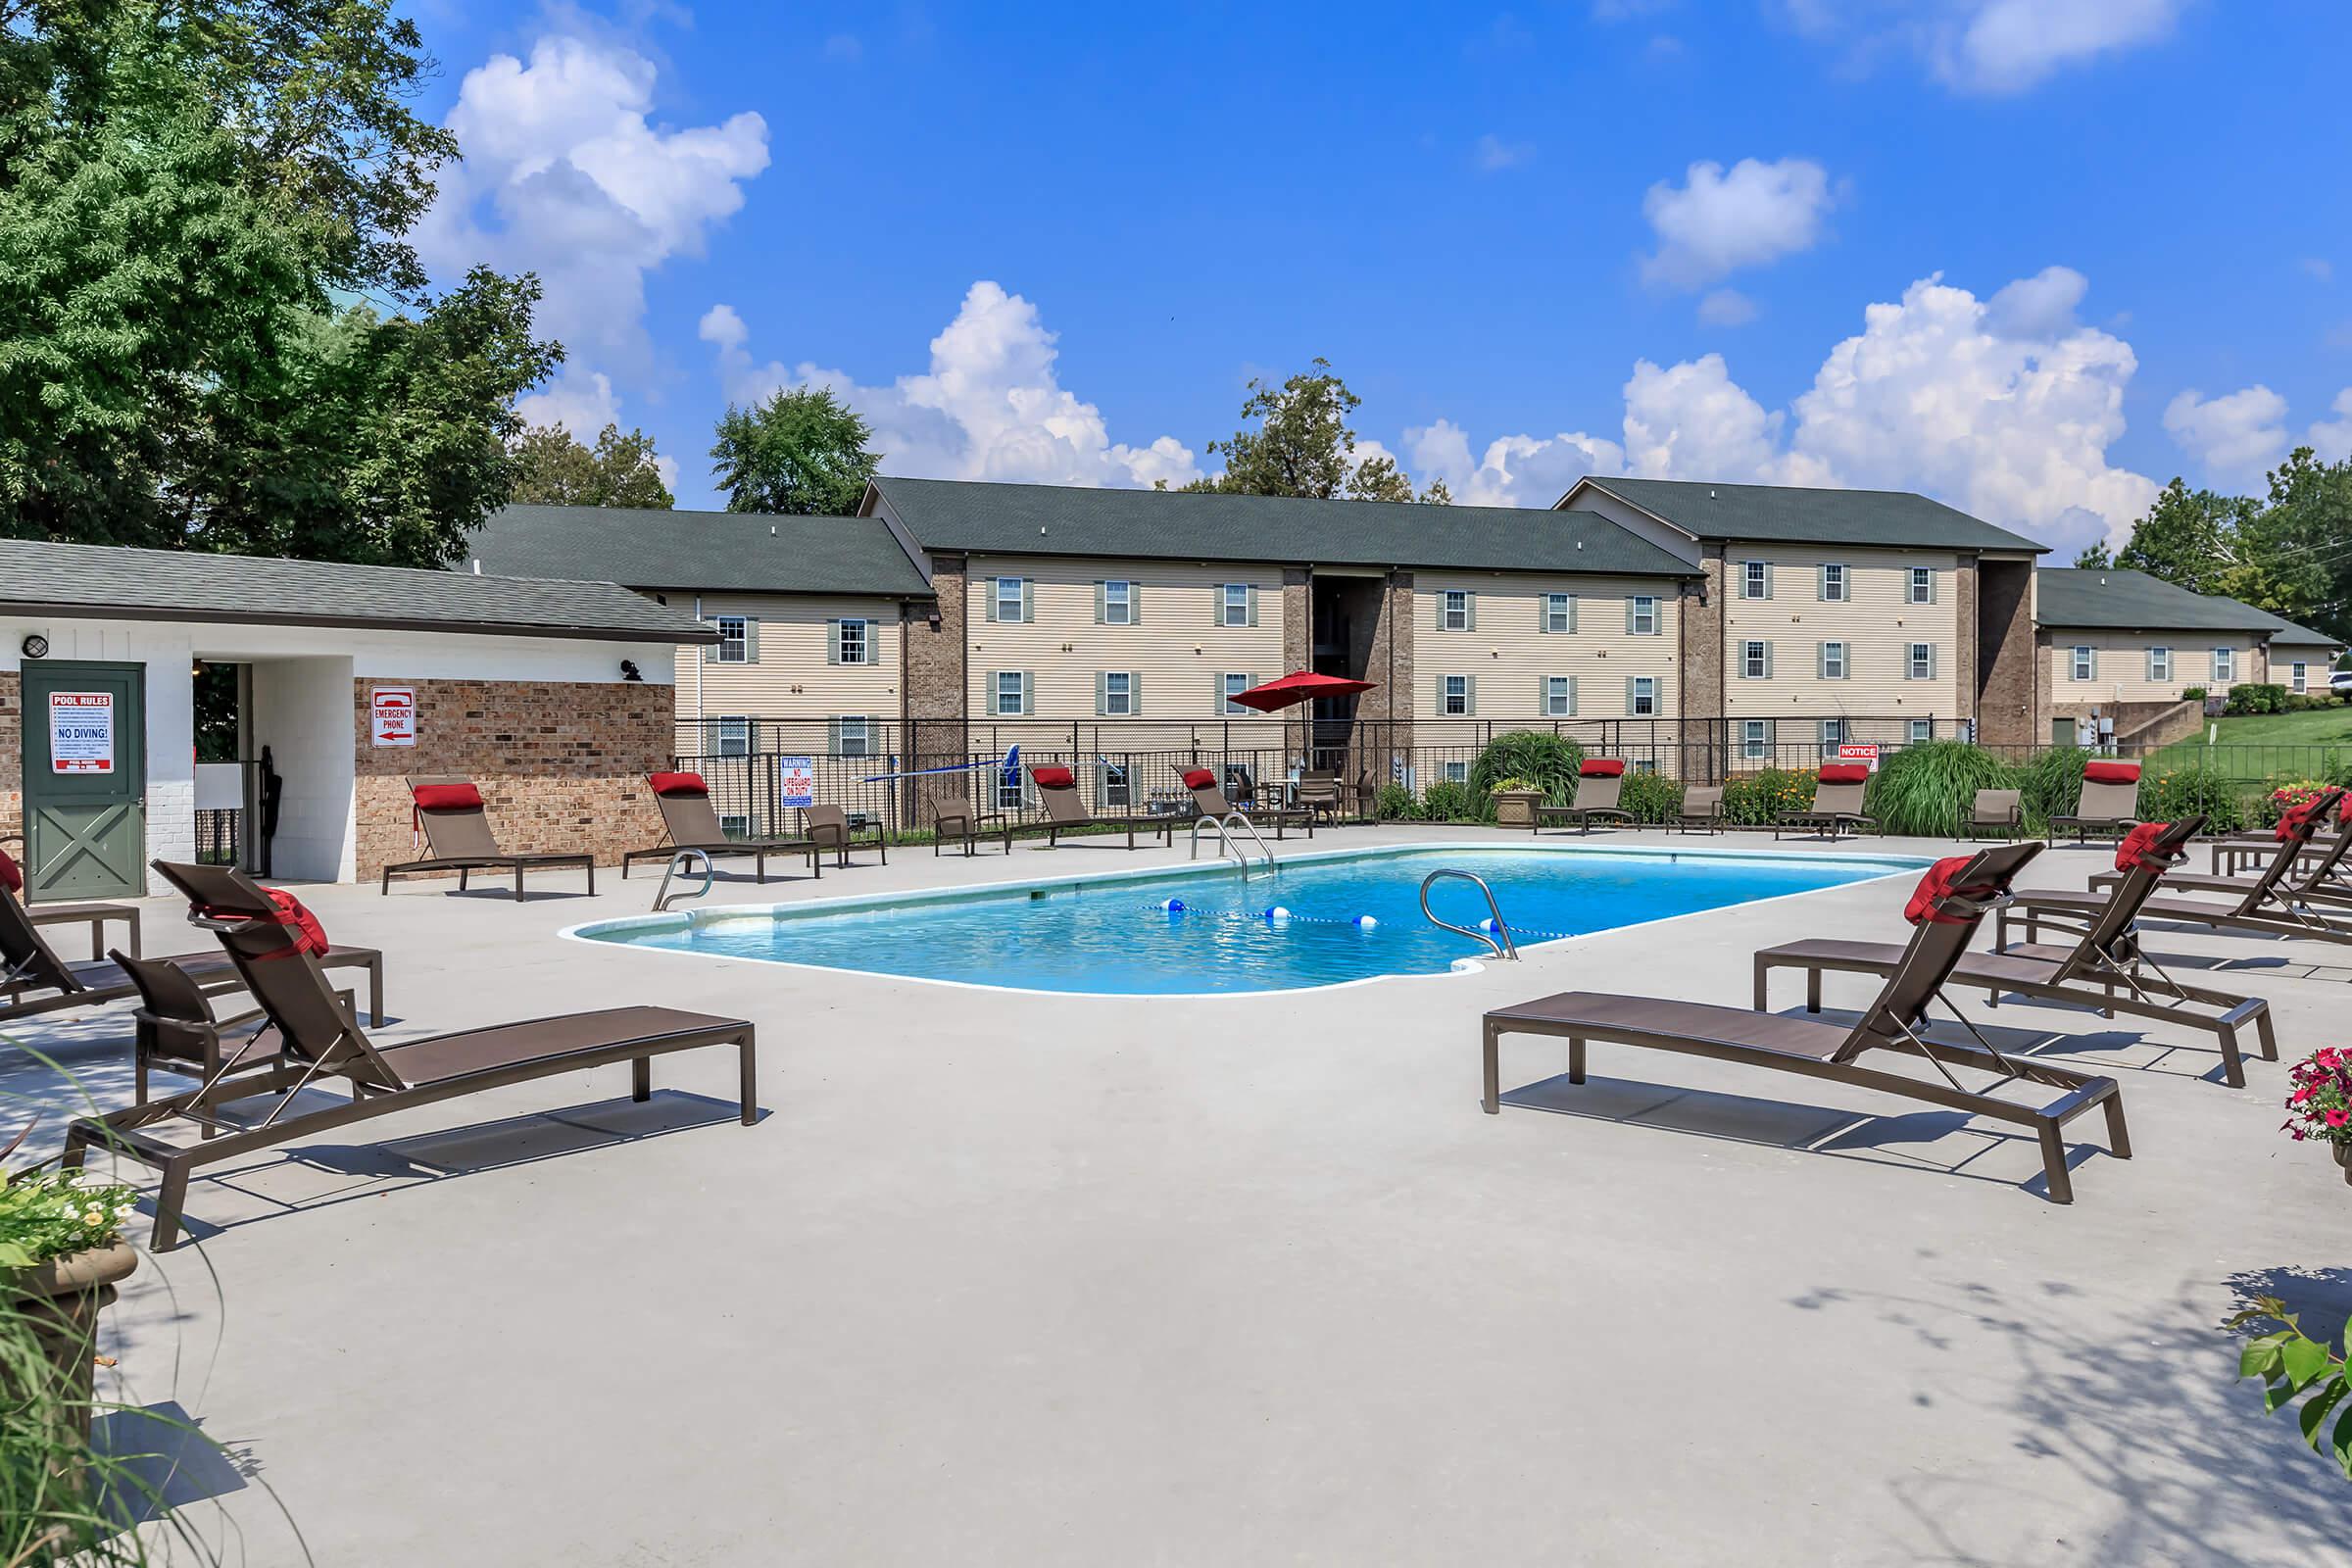 Relax beside our shimmering swimming pool at Eagles Crest at Jack Miller in Clarksville, TN